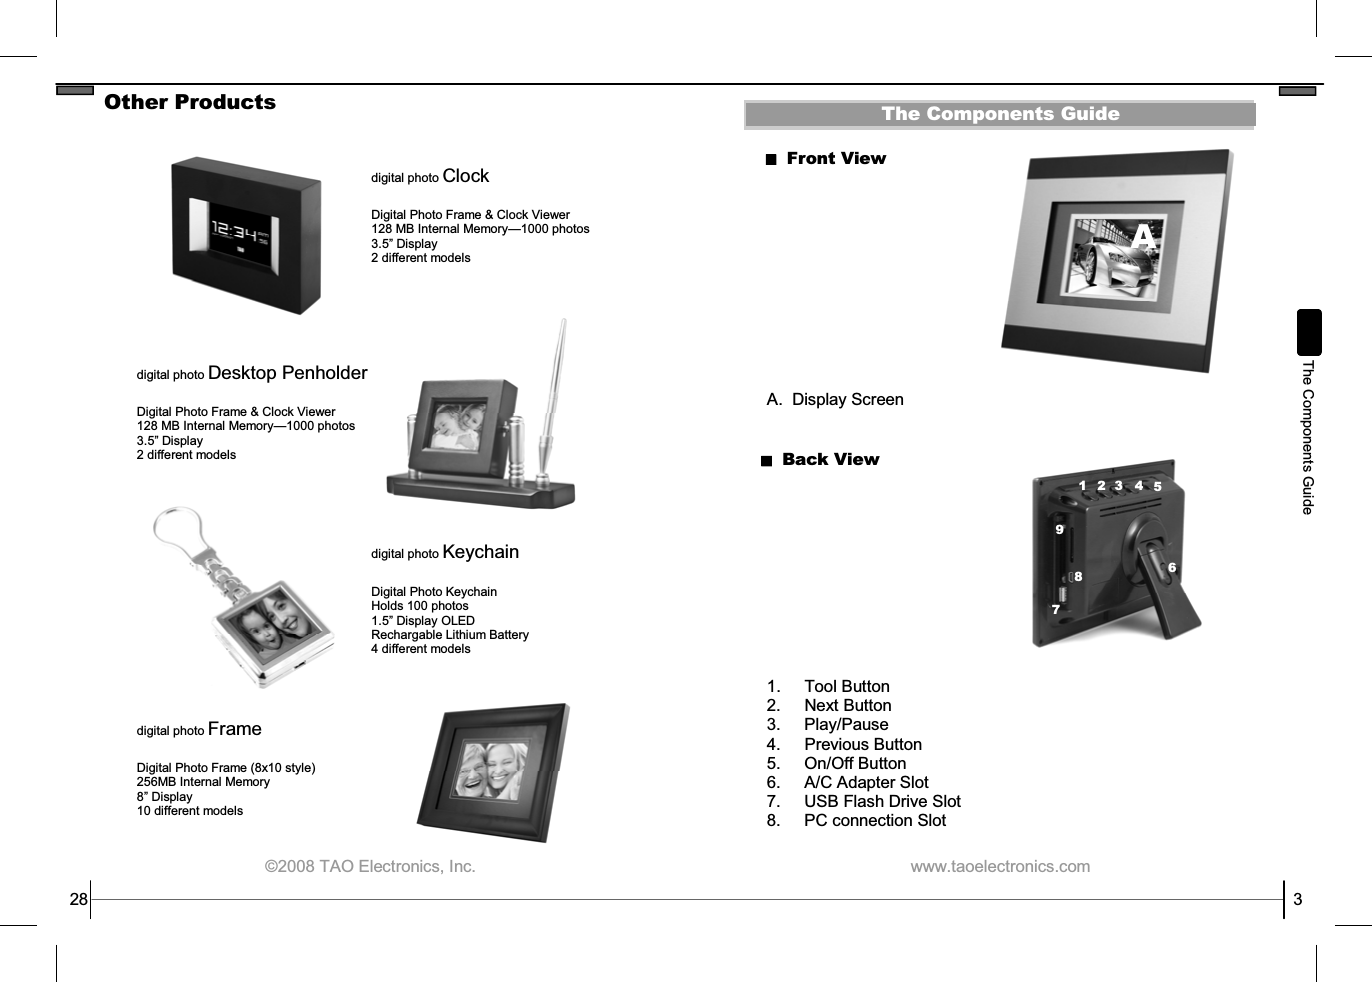  ©2008 TAO Electronics, Inc. Other Products 28 digital photo Clock   Digital Photo Frame &amp; Clock Viewer 128 MB Internal Memory—1000 photos 3.5” Display 2 different models digital photo Desktop Penholder  Digital Photo Frame &amp; Clock Viewer 128 MB Internal Memory—1000 photos 3.5” Display 2 different models digital photo Keychain  Digital Photo Keychain Holds 100 photos 1.5” Display OLED Rechargable Lithium Battery 4 different models digital photo Frame  Digital Photo Frame (8x10 style) 256MB Internal Memory 8” Display  10 different models   www.taoelectronics.com                                                   3 The Components Guide Front View A.  Display Screen Back View 1. Tool Button 2. Next Button 3.  Play/Pause 4.  Previous Button 5. On/Off Button 6. A/C Adapter Slot 7. USB Flash Drive Slot 8.  PC connection Slot  The Components Guide 1  2  3 4 5 6 7 A 8 9 